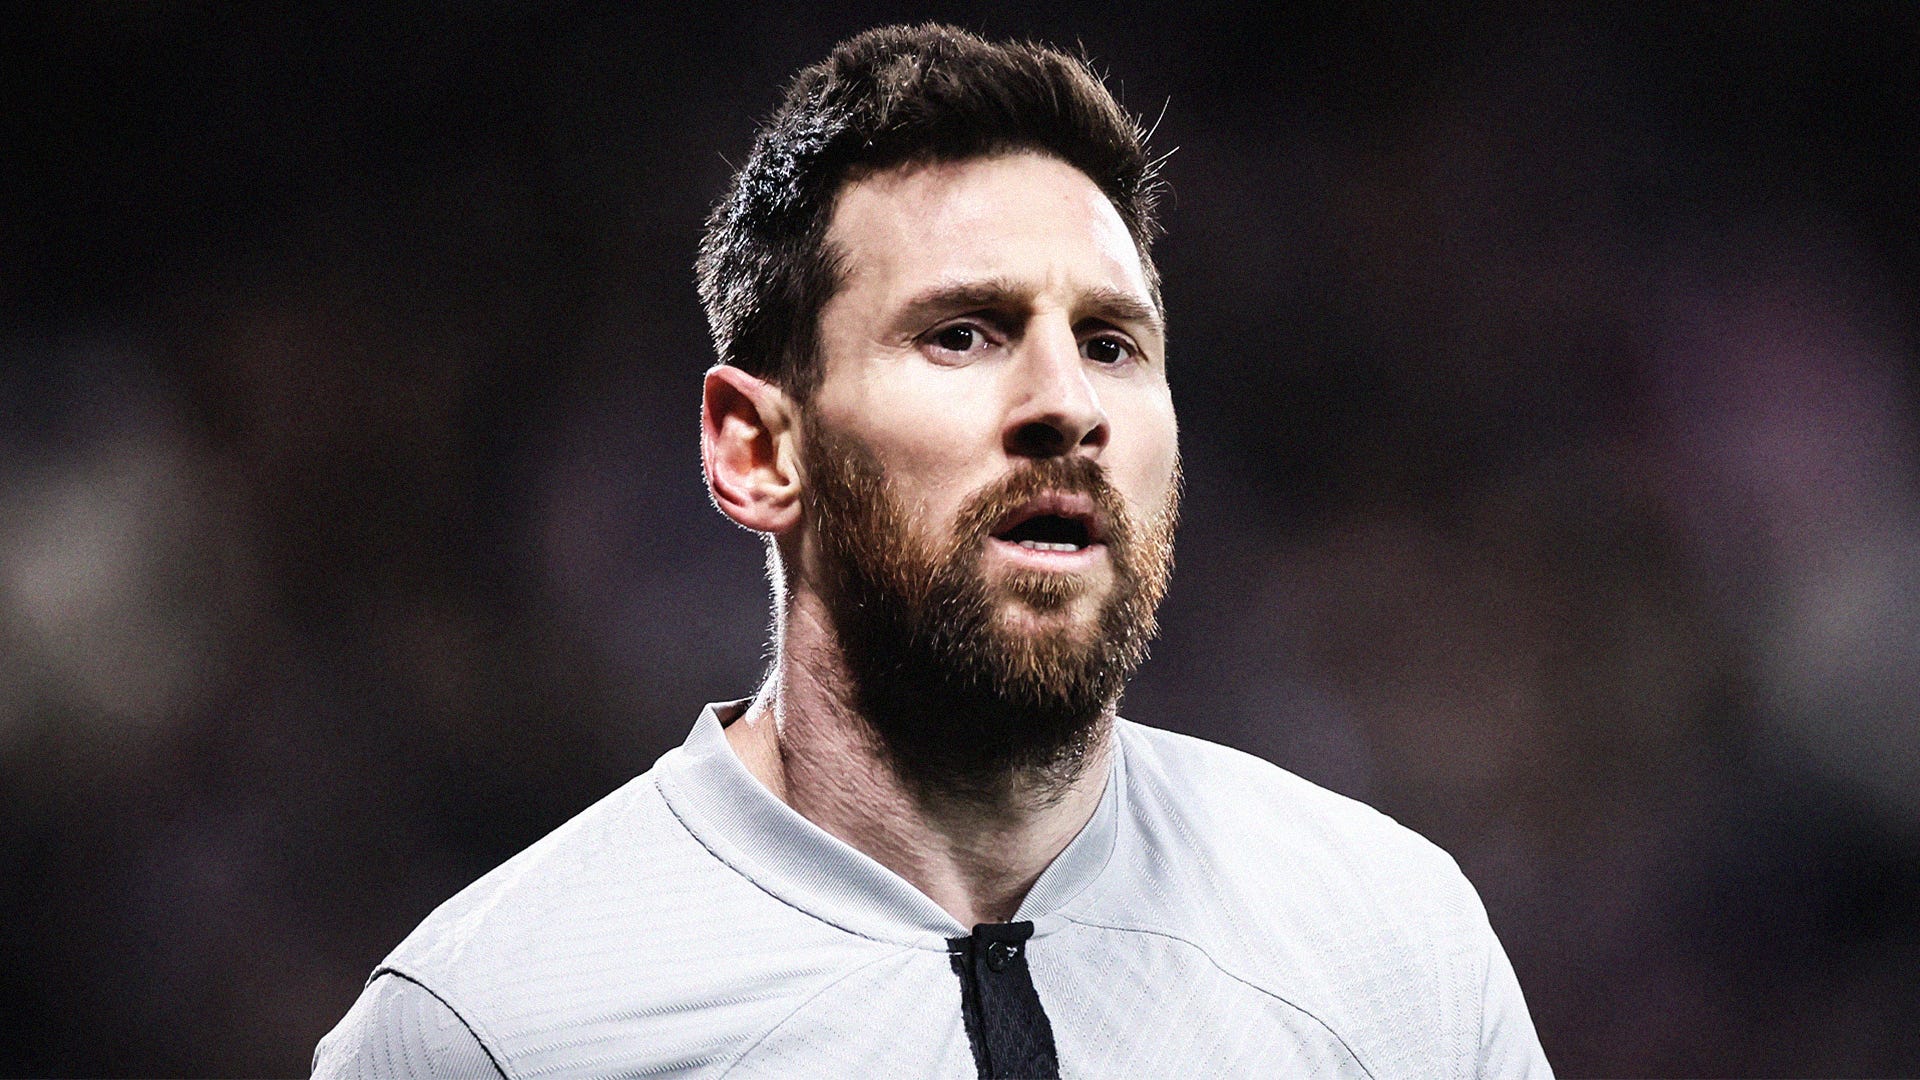 Top 30 Facts About Lionel Messi You Didn’t Know